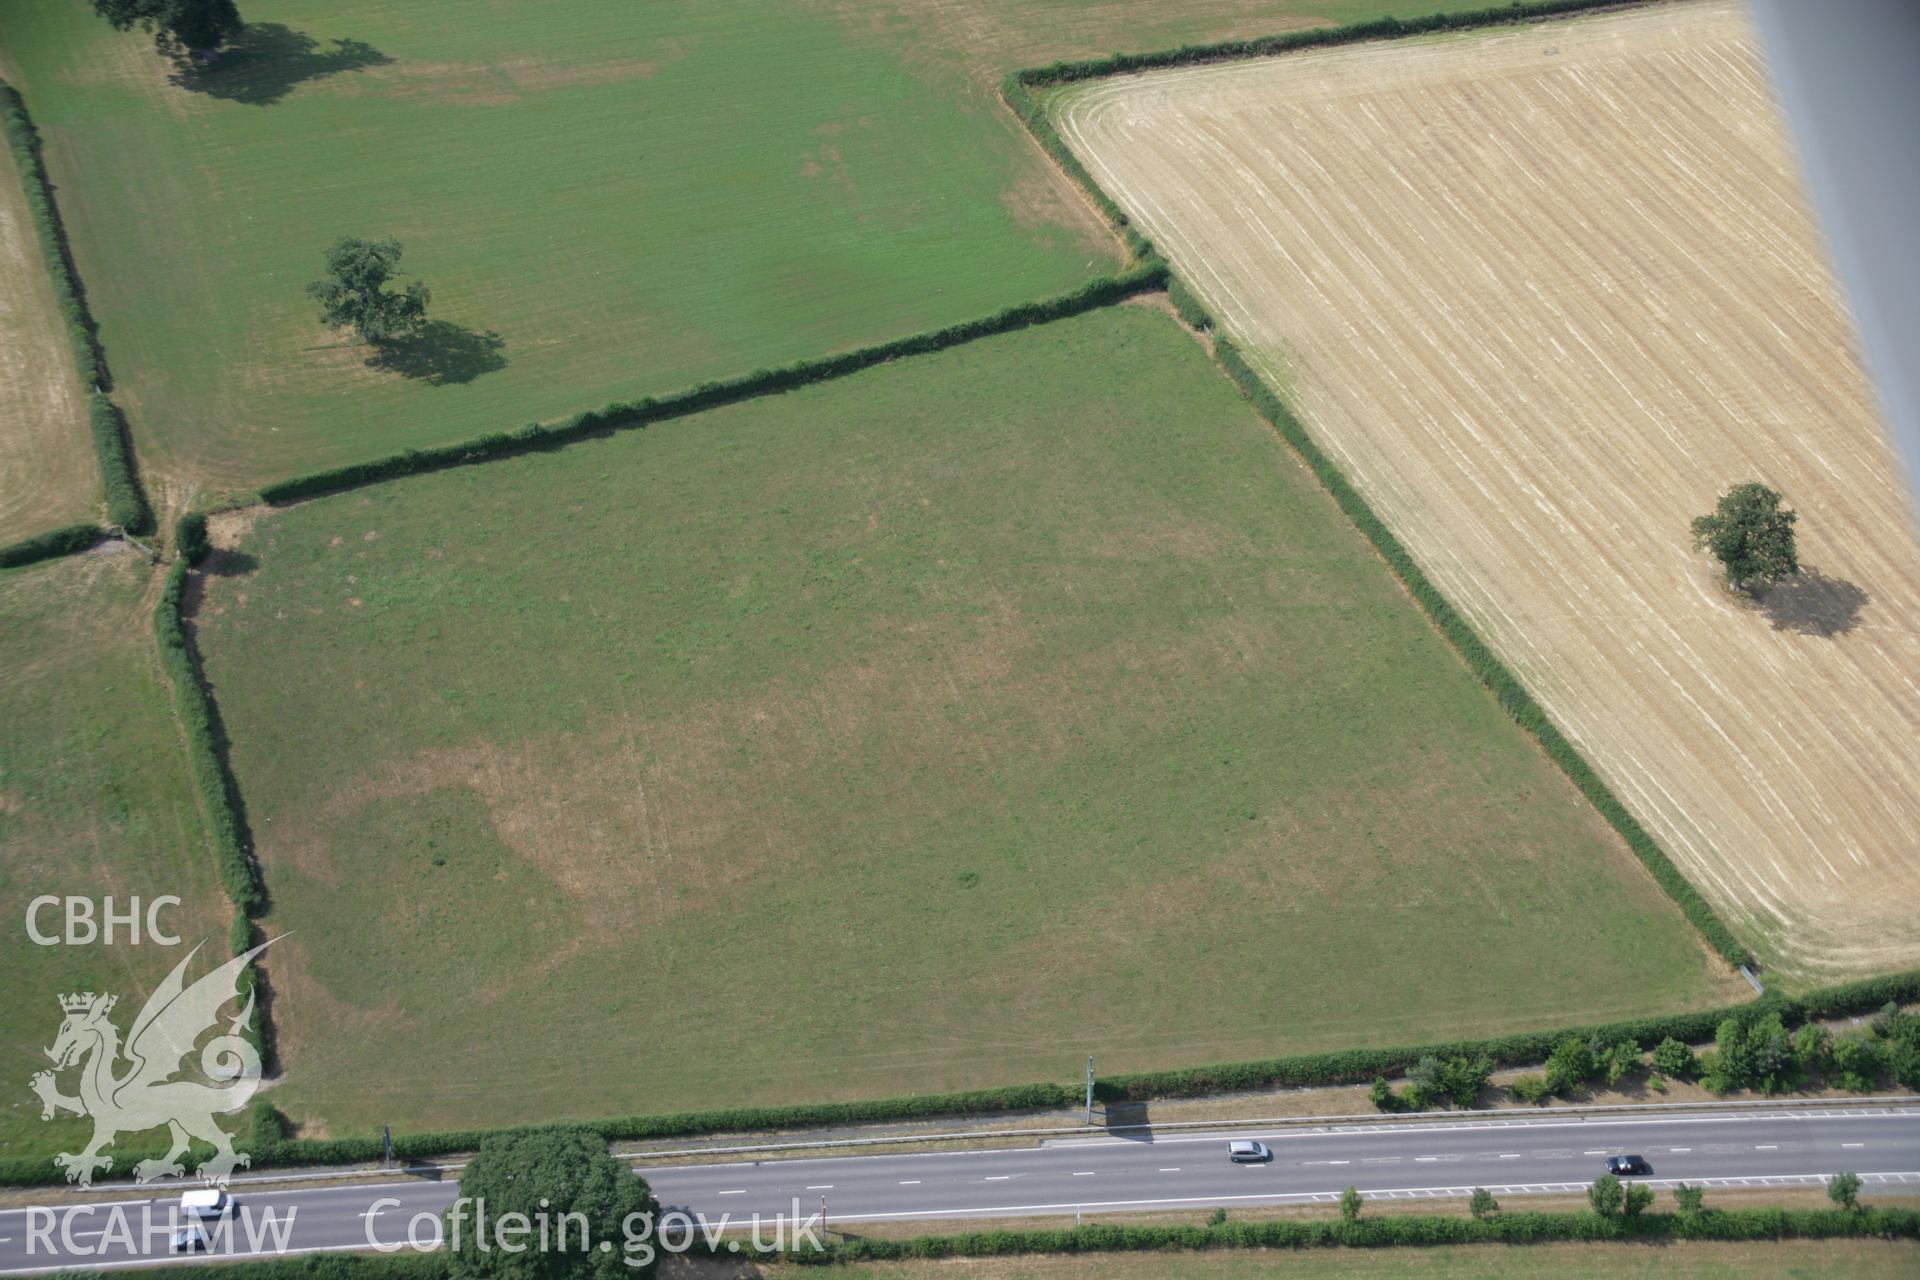 RCAHMW colour oblique aerial photograph of parchmarks approximately 200 metres to the north west of Llwyn-wron Cursus. Taken on 25 July 2006 by Toby Driver